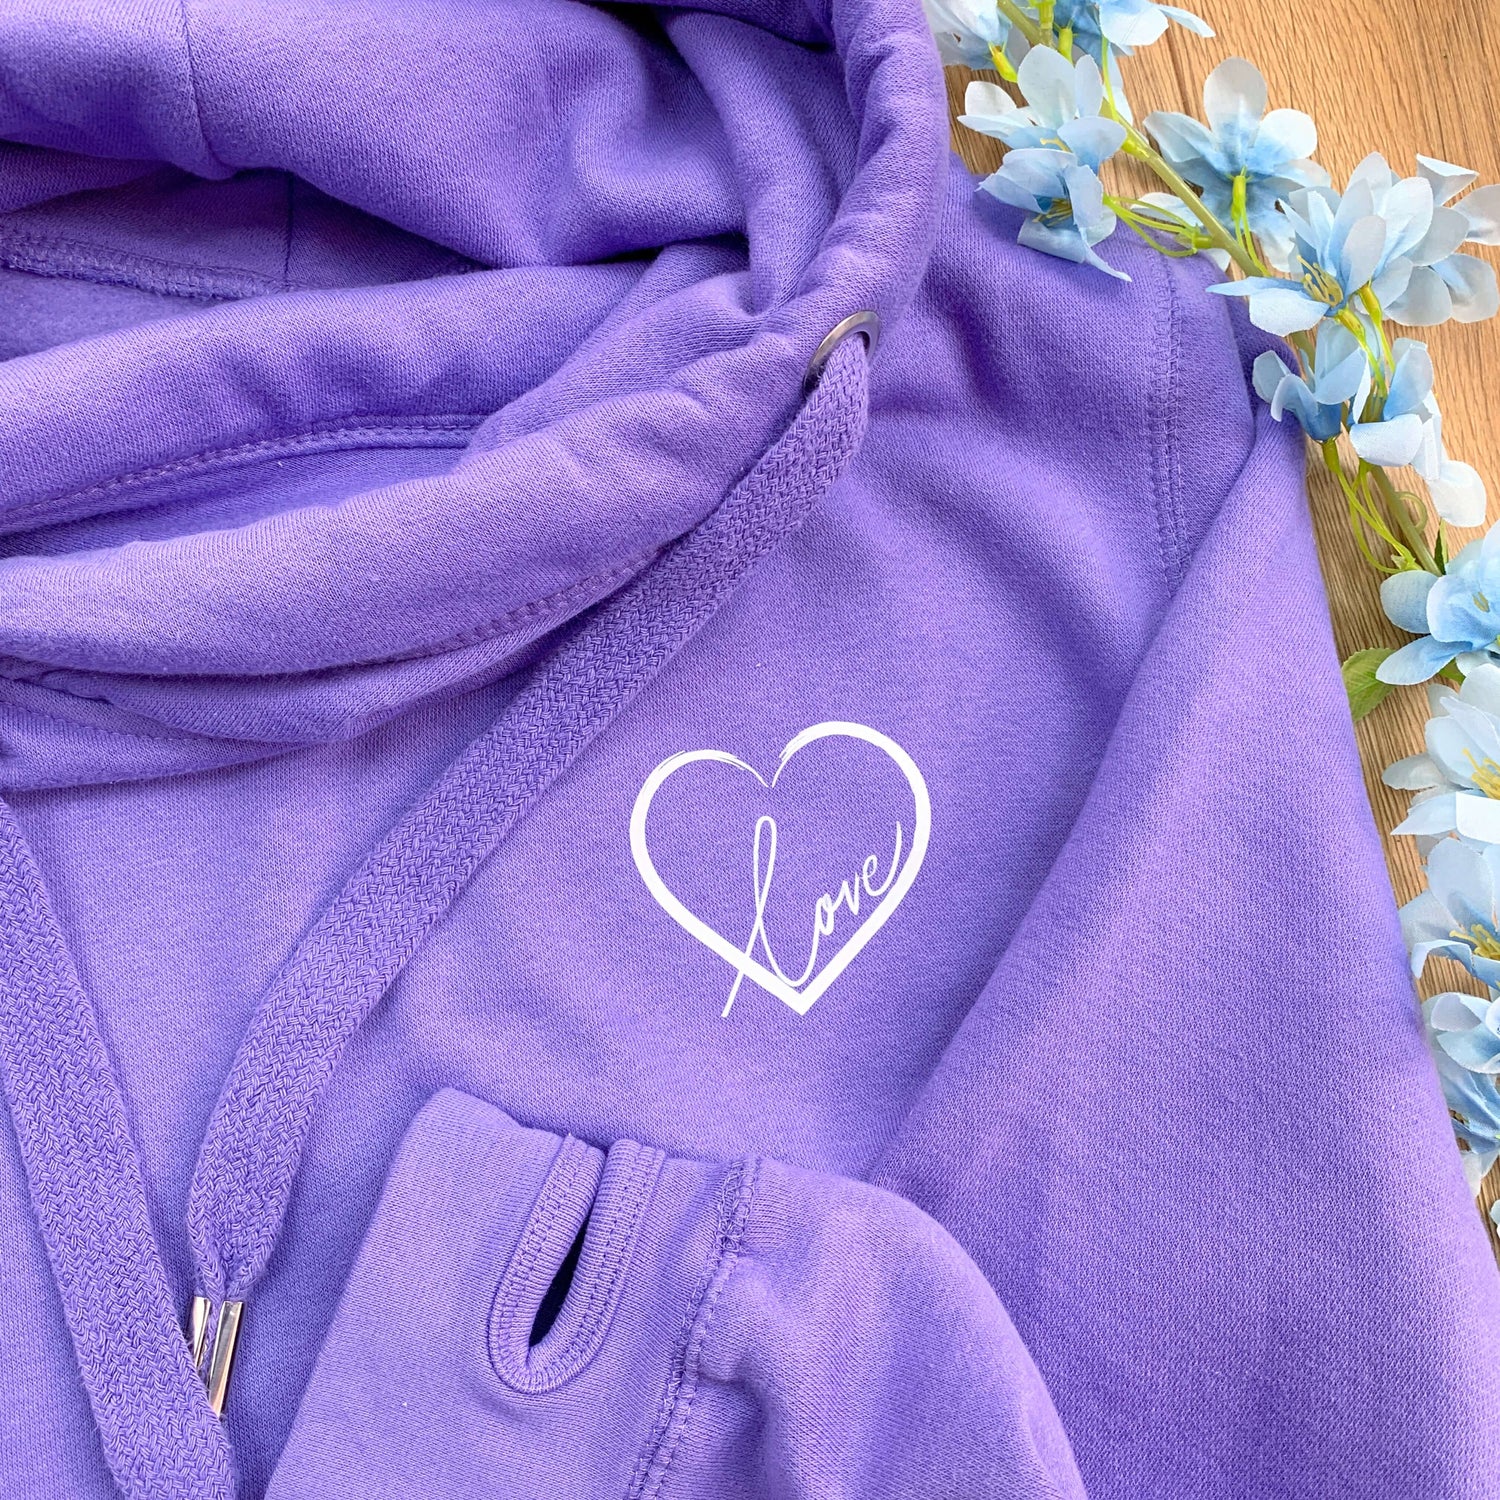 Close up photo of purple lavender unisex Love heart cross cowl neck hoodie. Cotton Polyester blend oversized casual style hoodie design has small love heart to upper left chest. White heart with word Love in white handwriting font nestled within the heart. Drawstrings with metal toggles to ends and thumb holes to long sleeve arm cuffs. Blue spring decorative flowers to right of photo resting next to top on a wooden floor